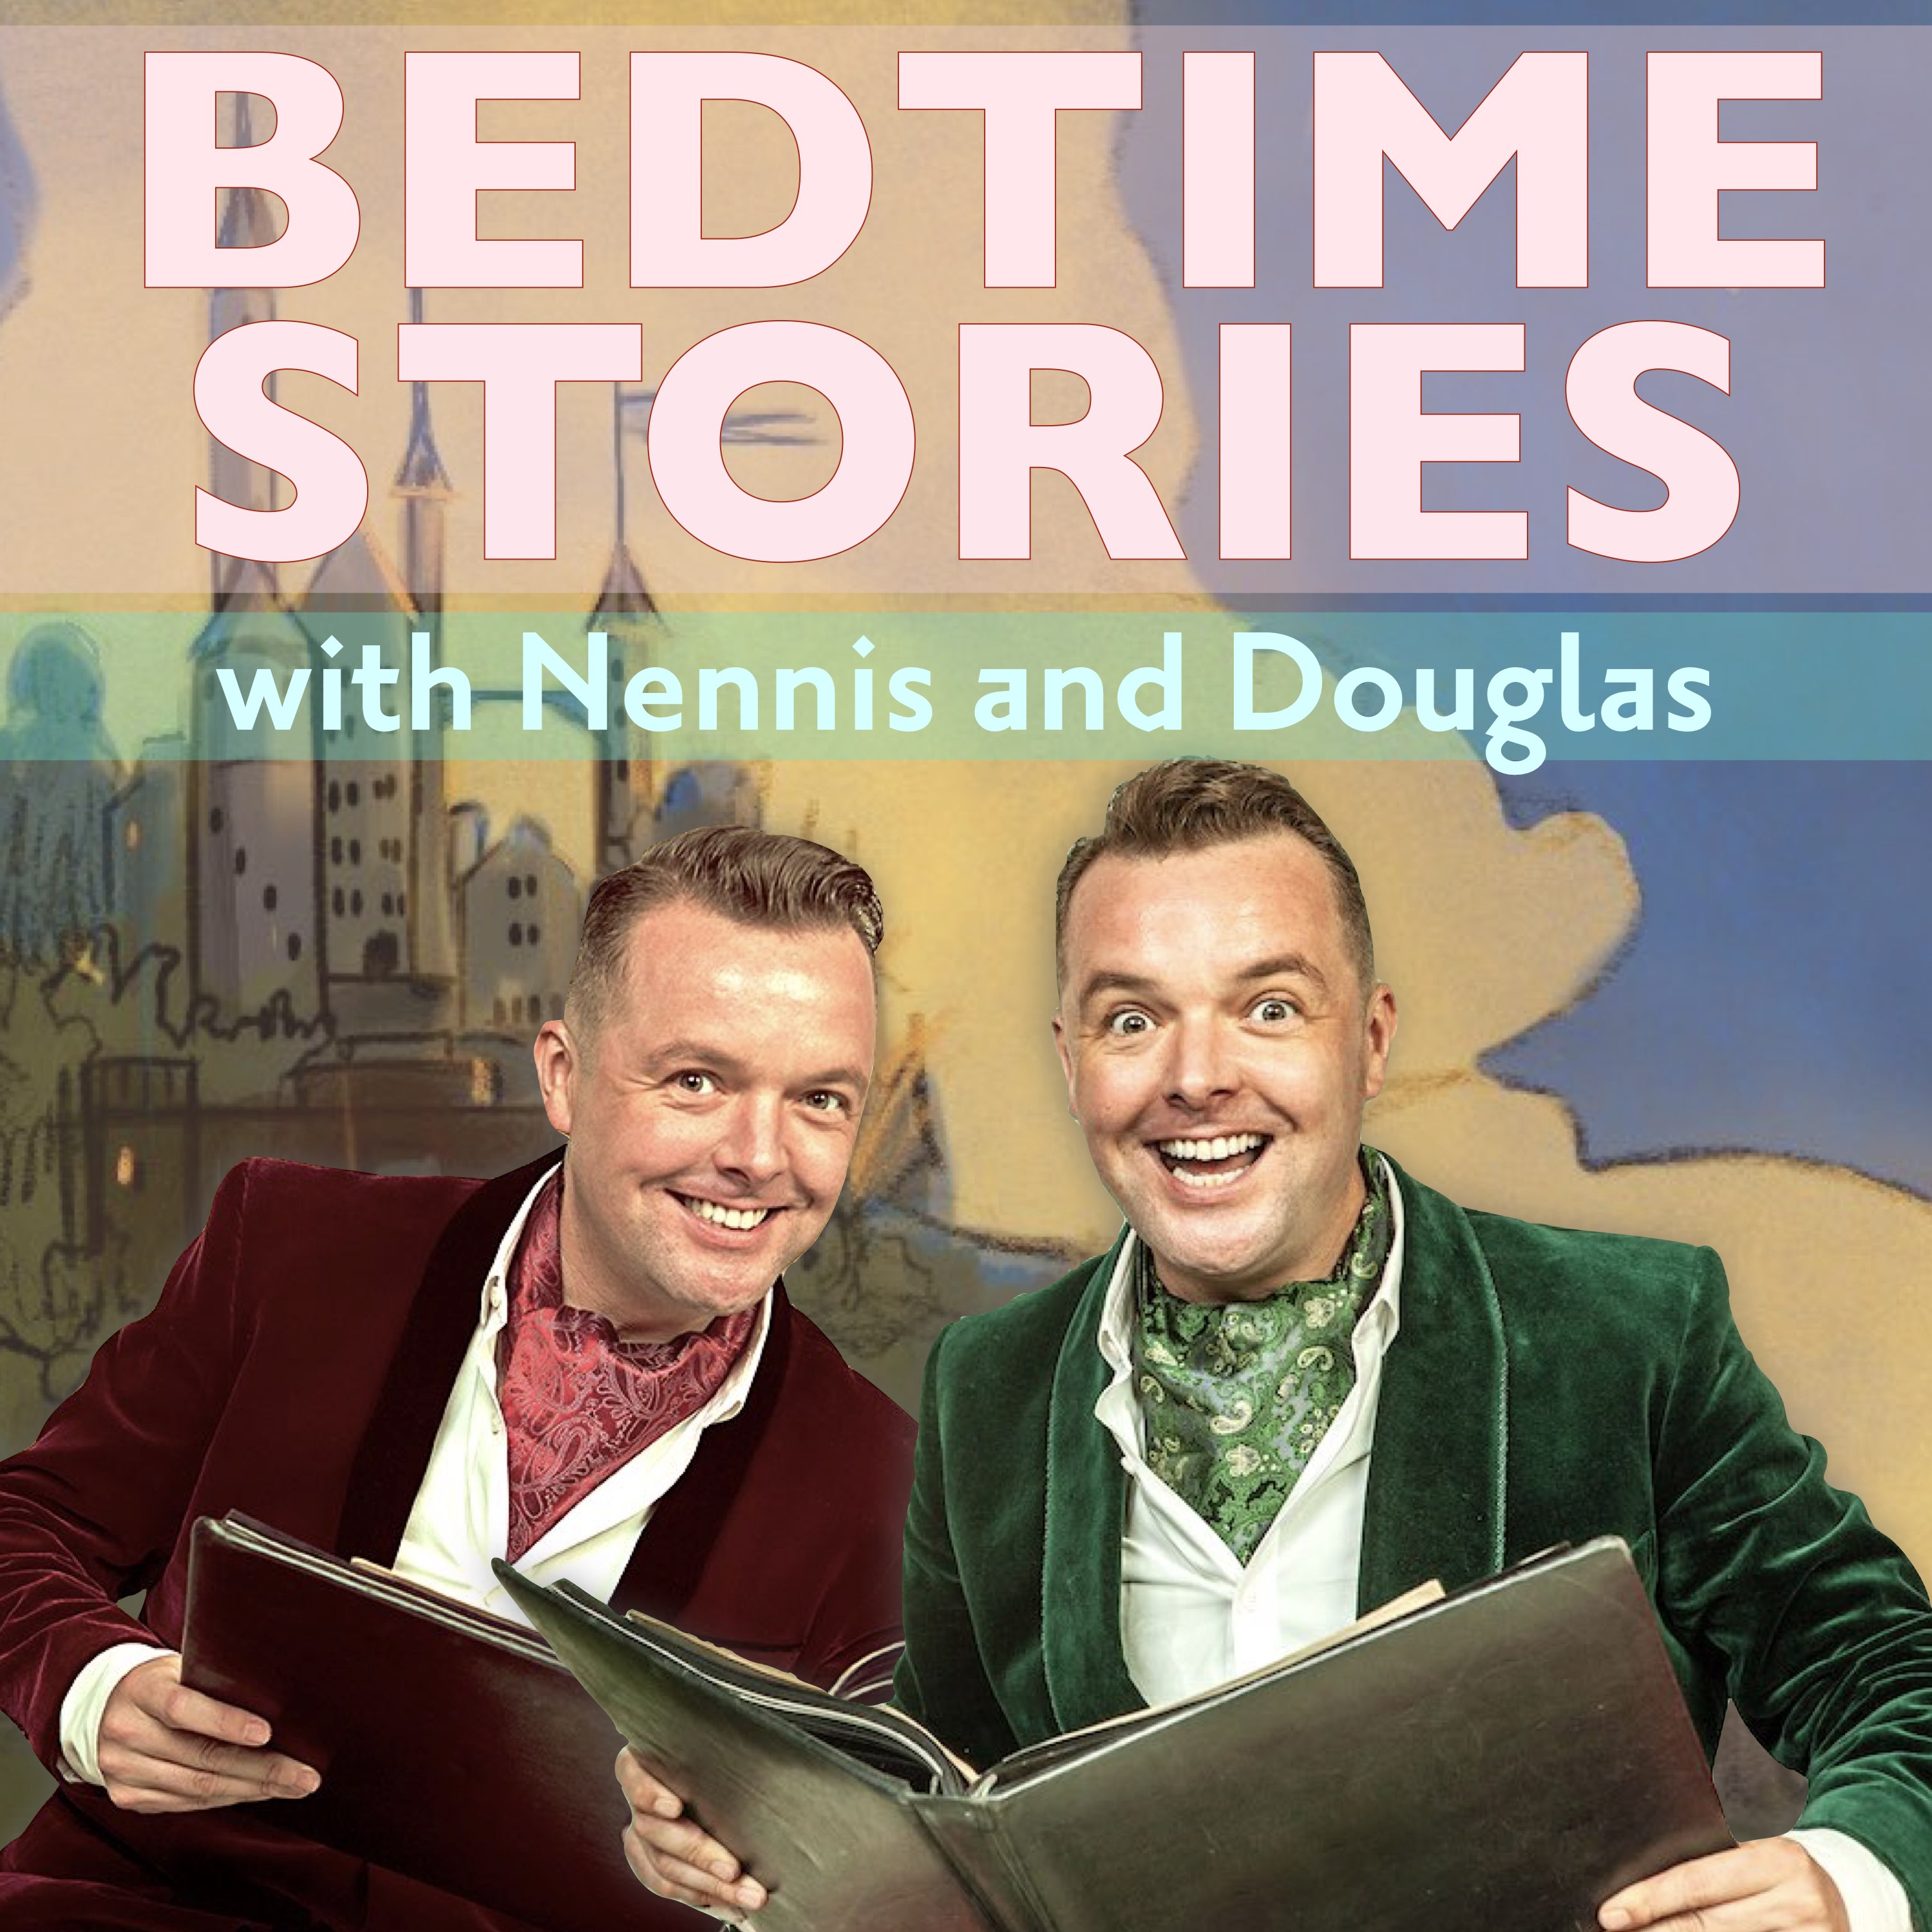 Bedtime Stories With Nennis And Douglas